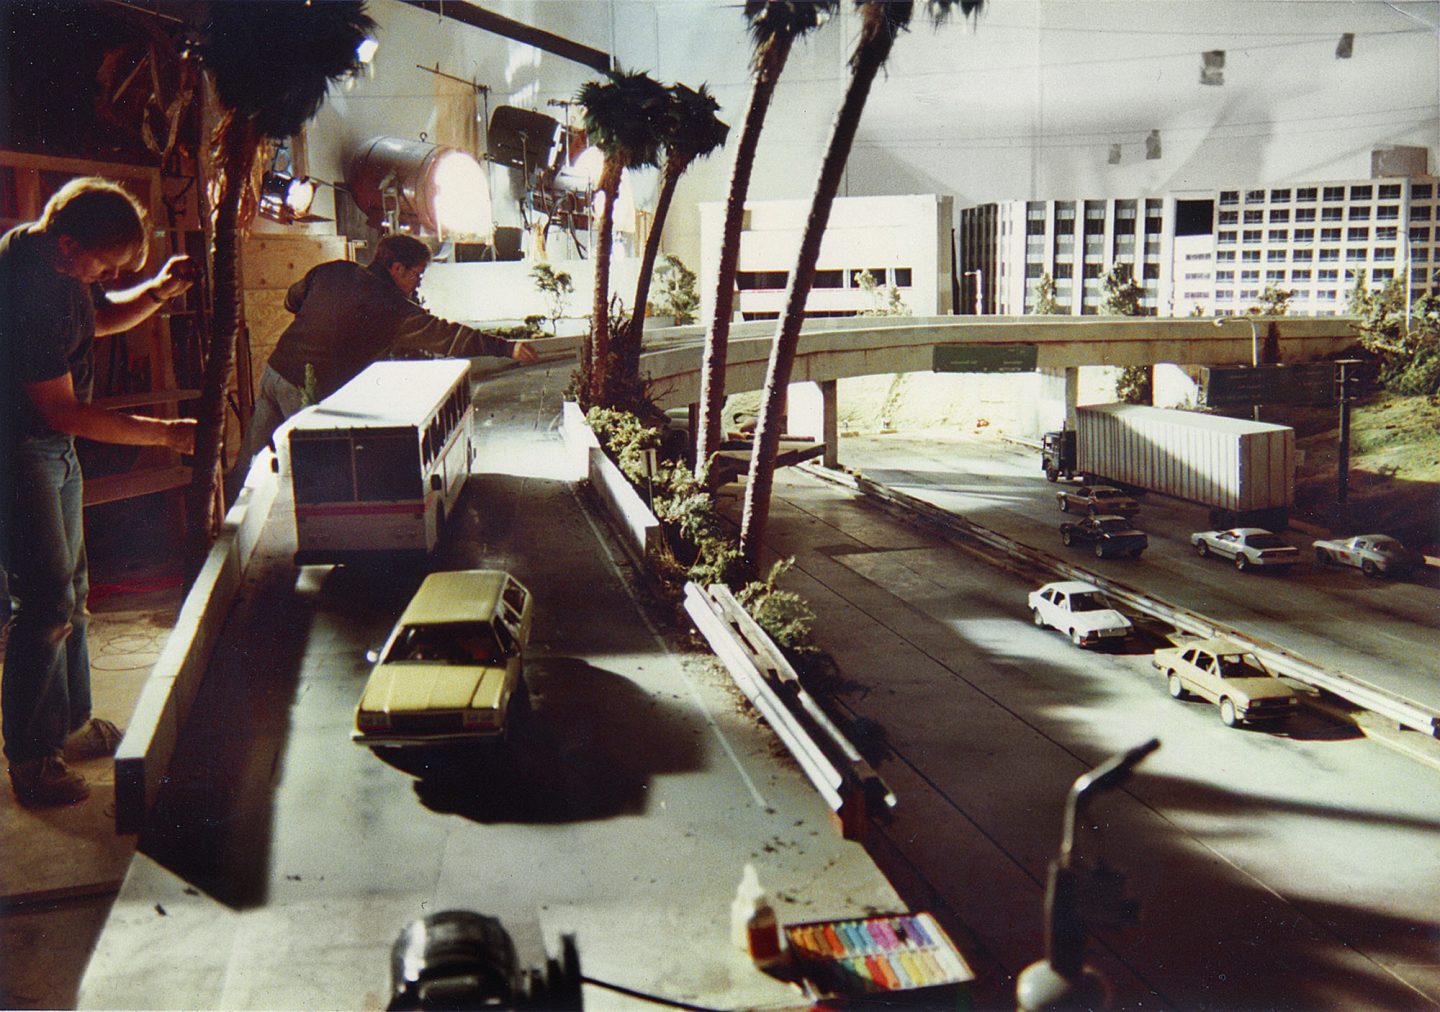 Setting up the freeway miniature. Robert Skotak is leaning over the freeway at rear.